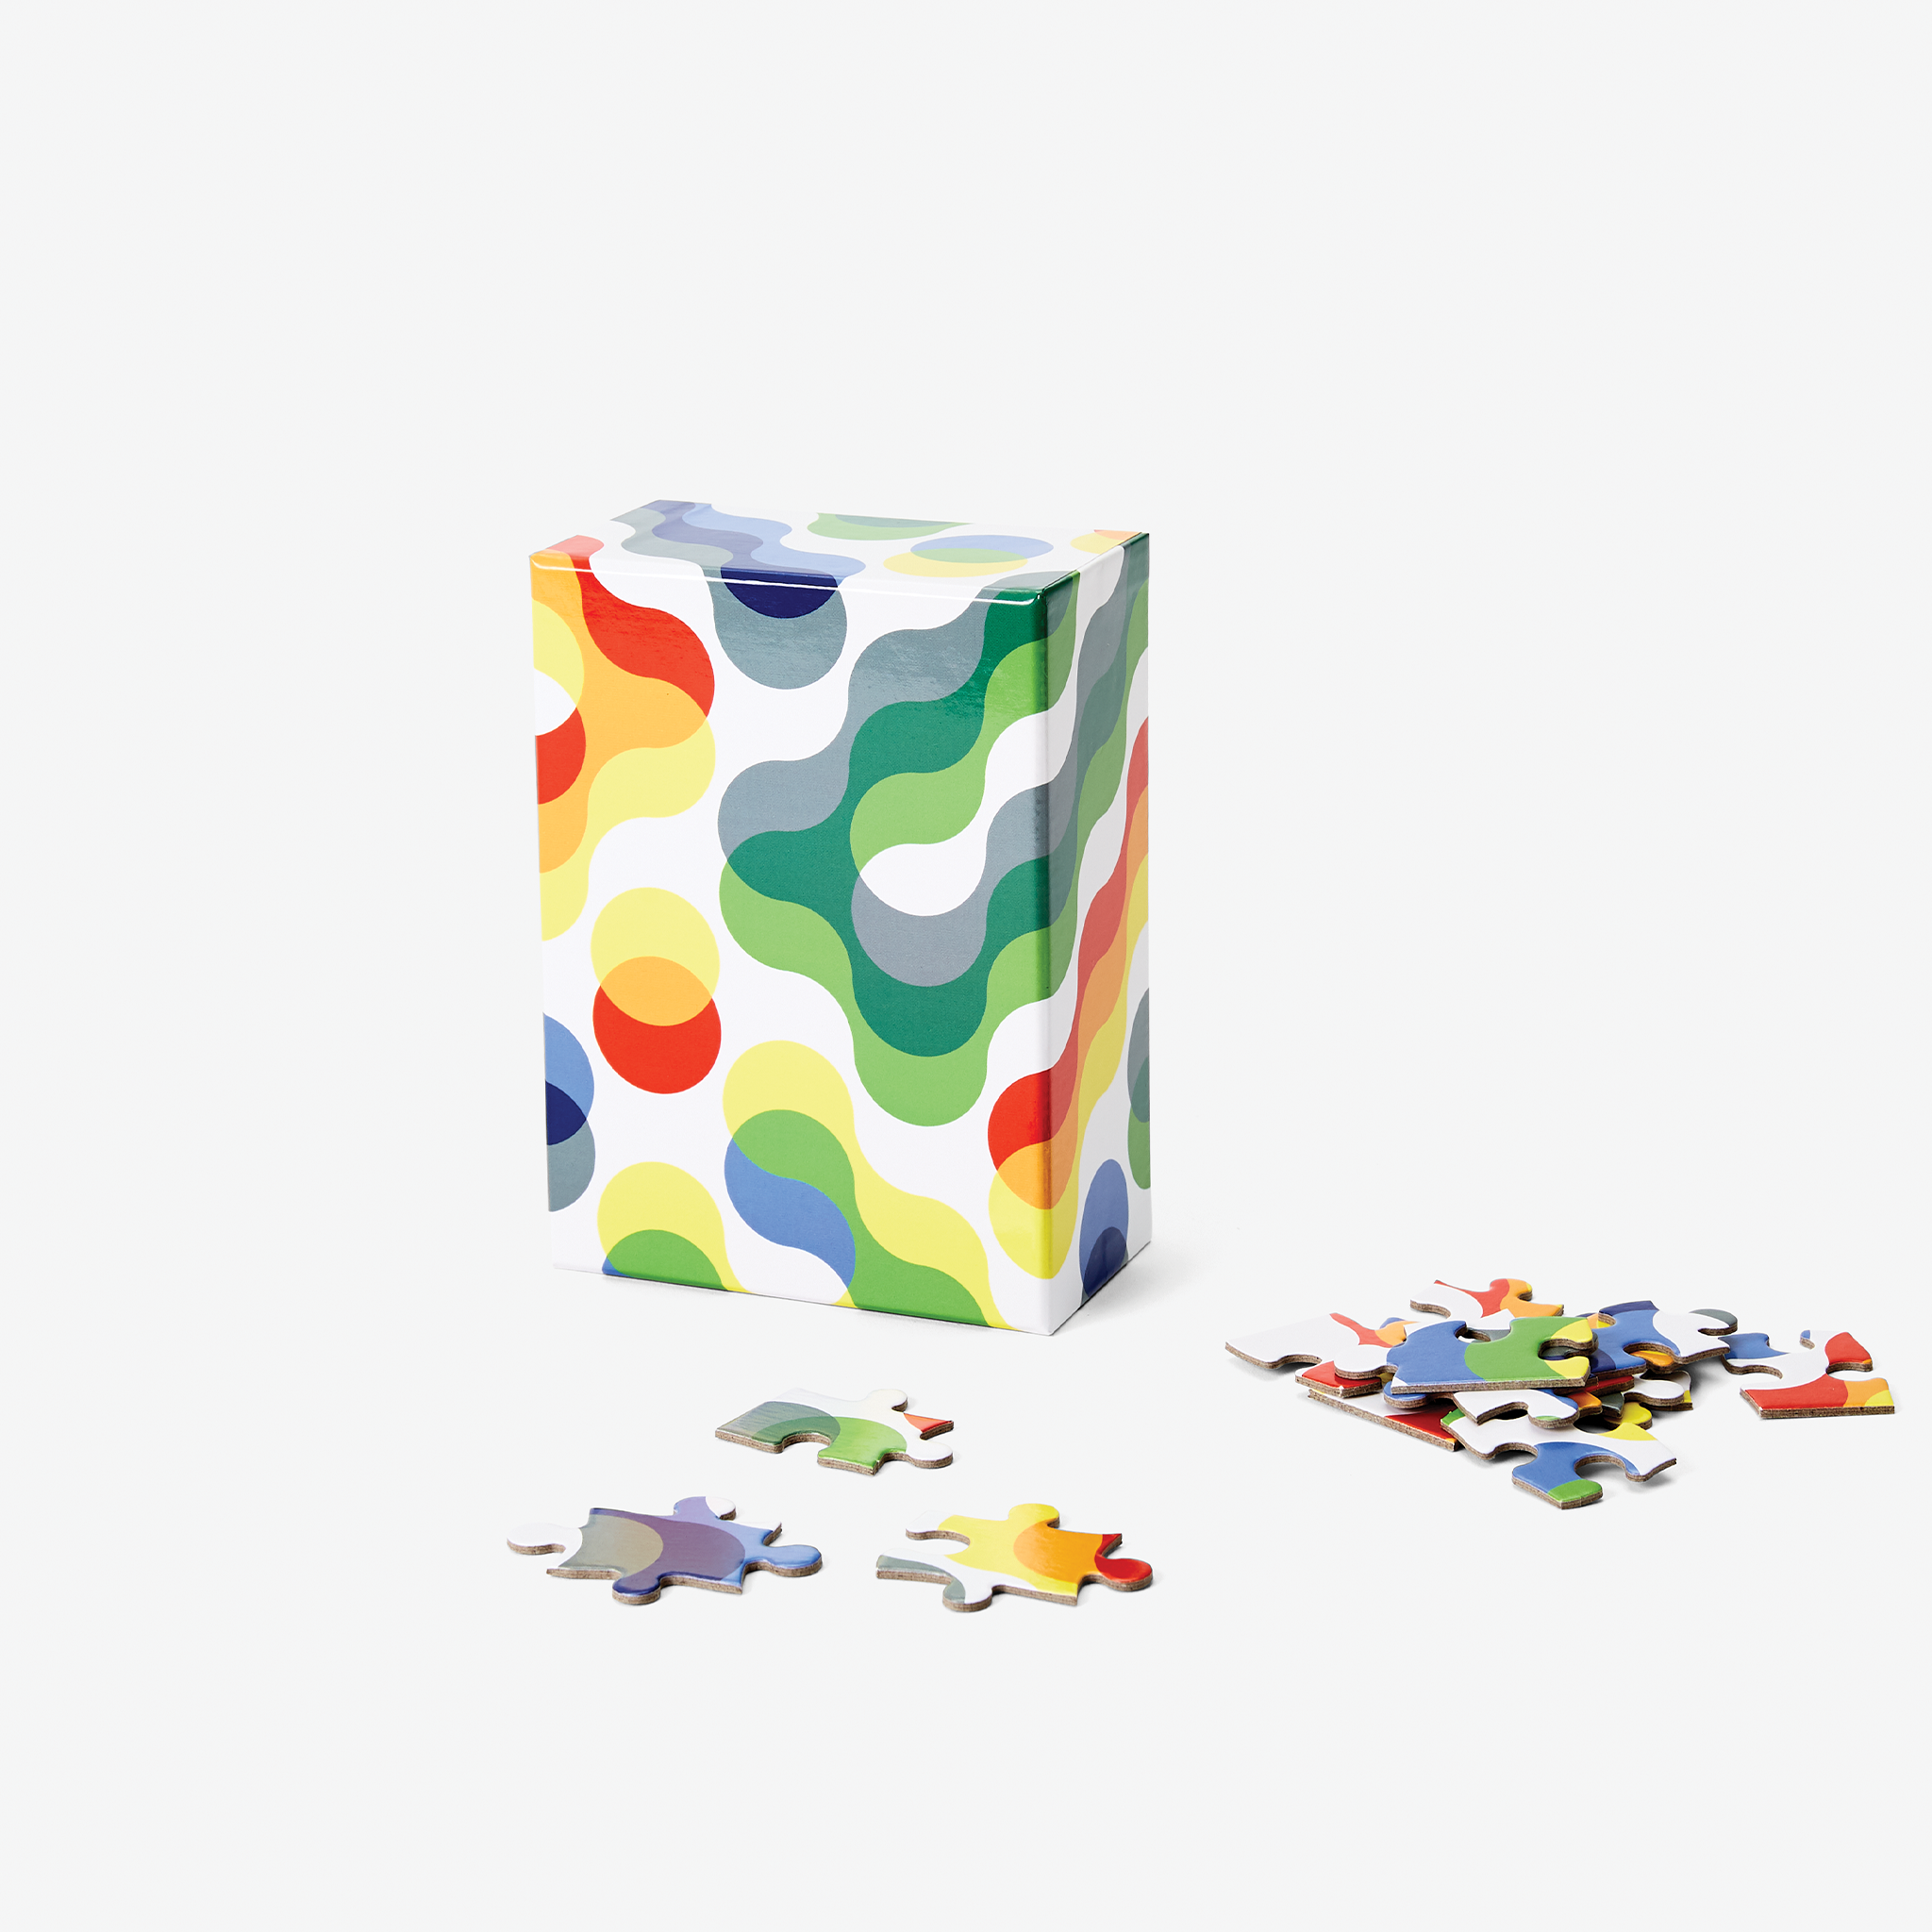 Arc Pattern Puzzle, Small by Dusen Dusen for Areaware